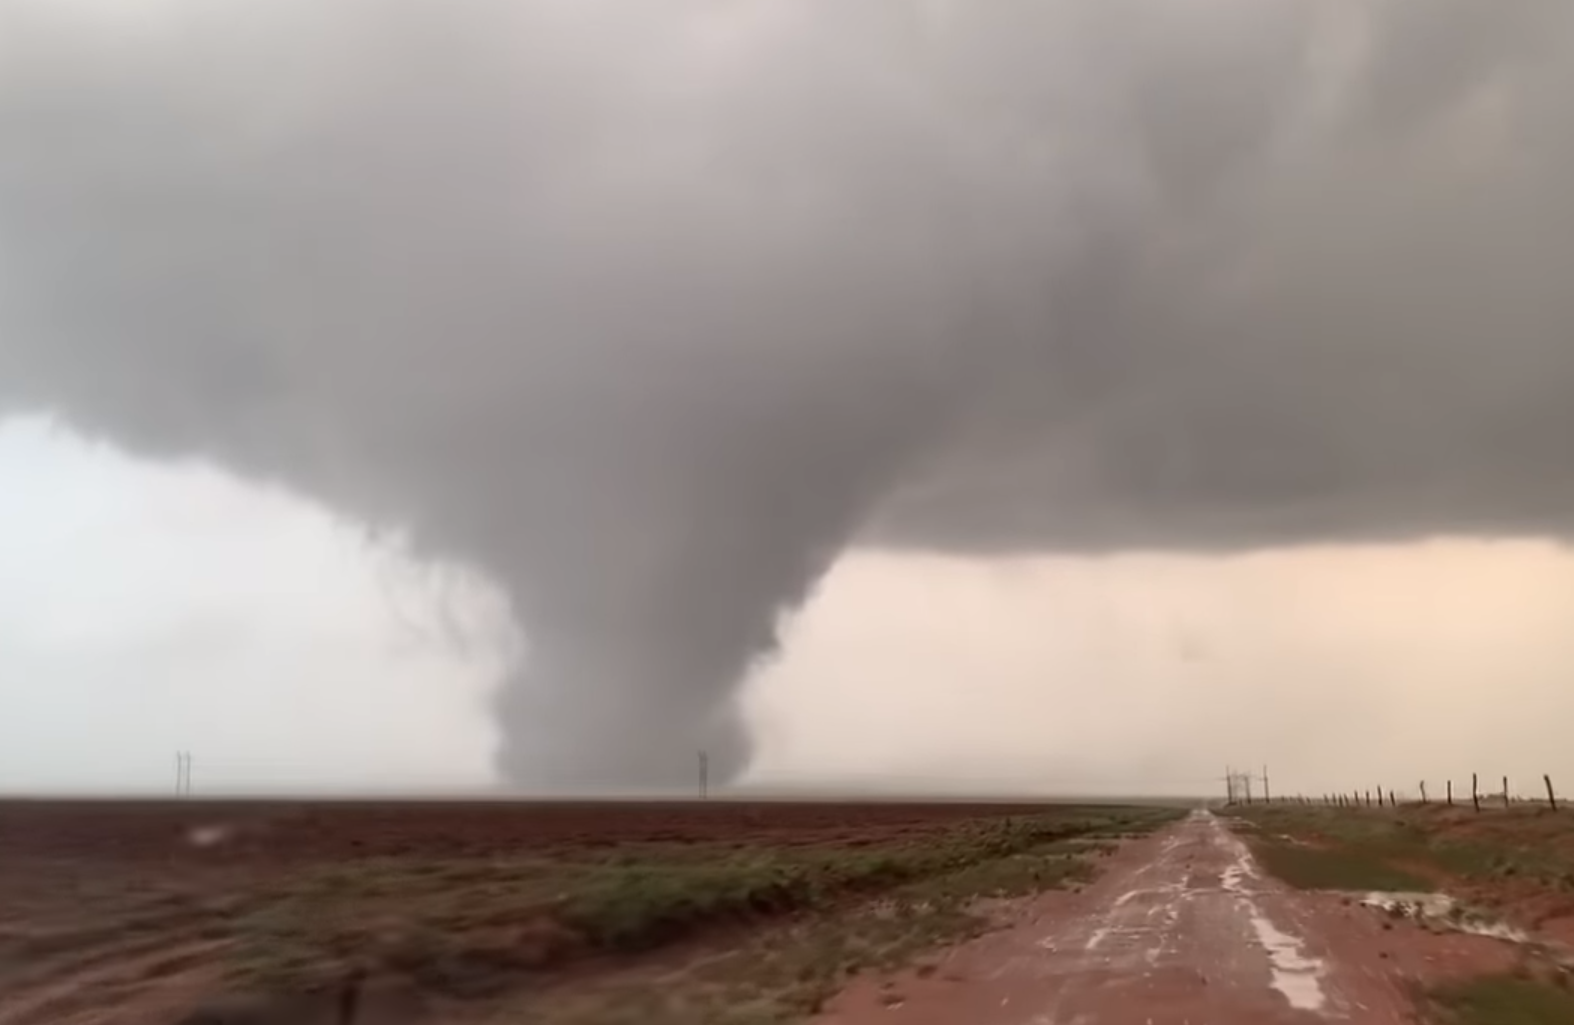 The tornado outbreak sequence of May 2019